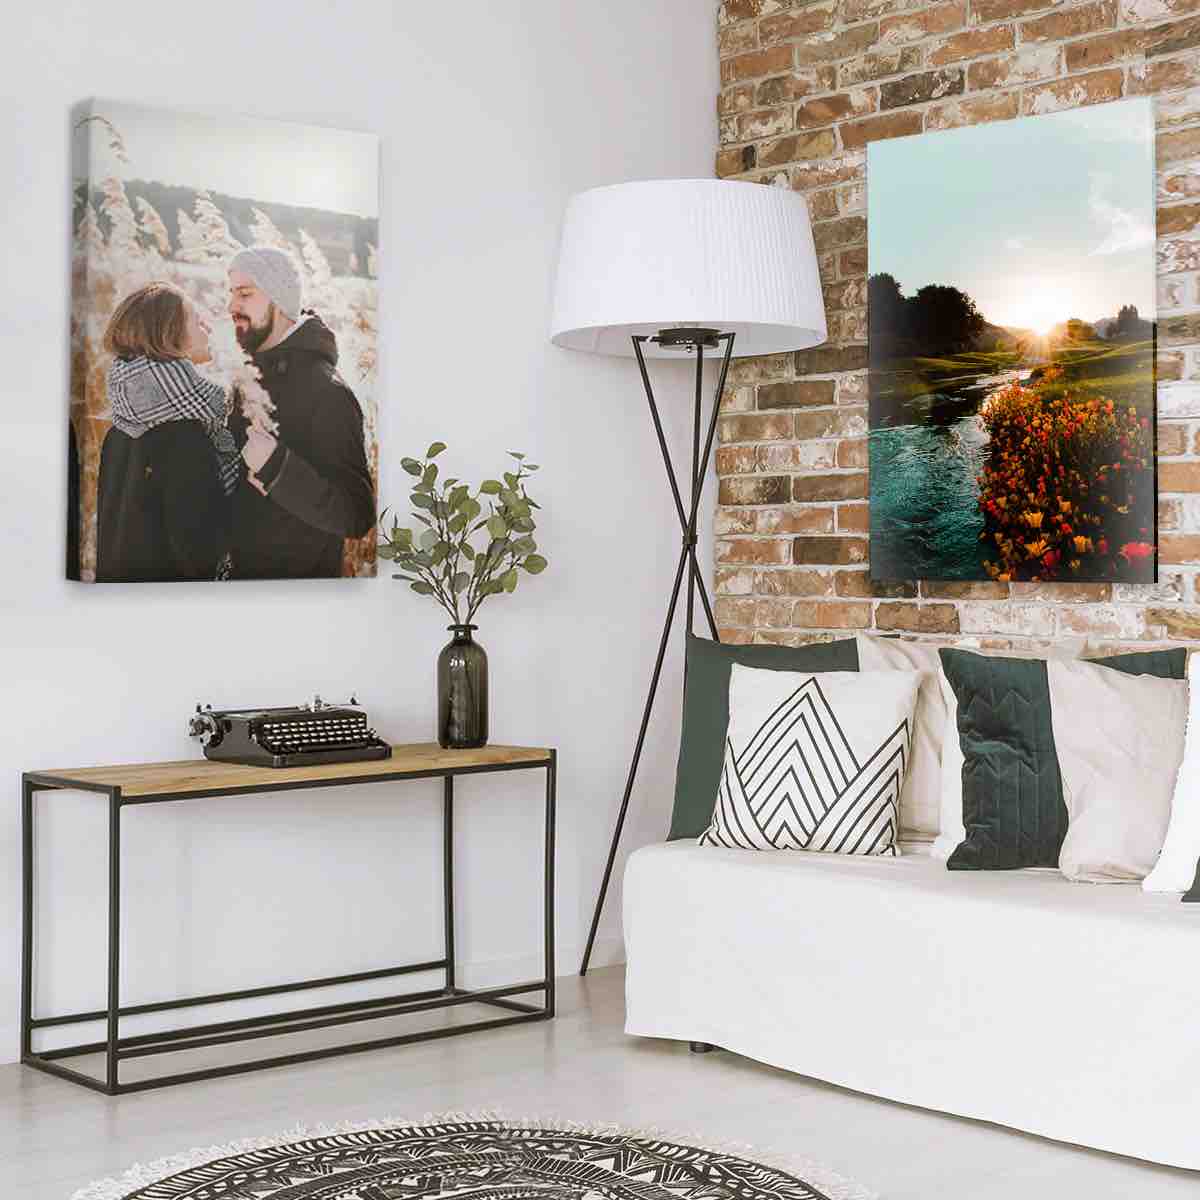 Posterjack Canvas & Acrylic Prints Displayed in a Styled Living Room